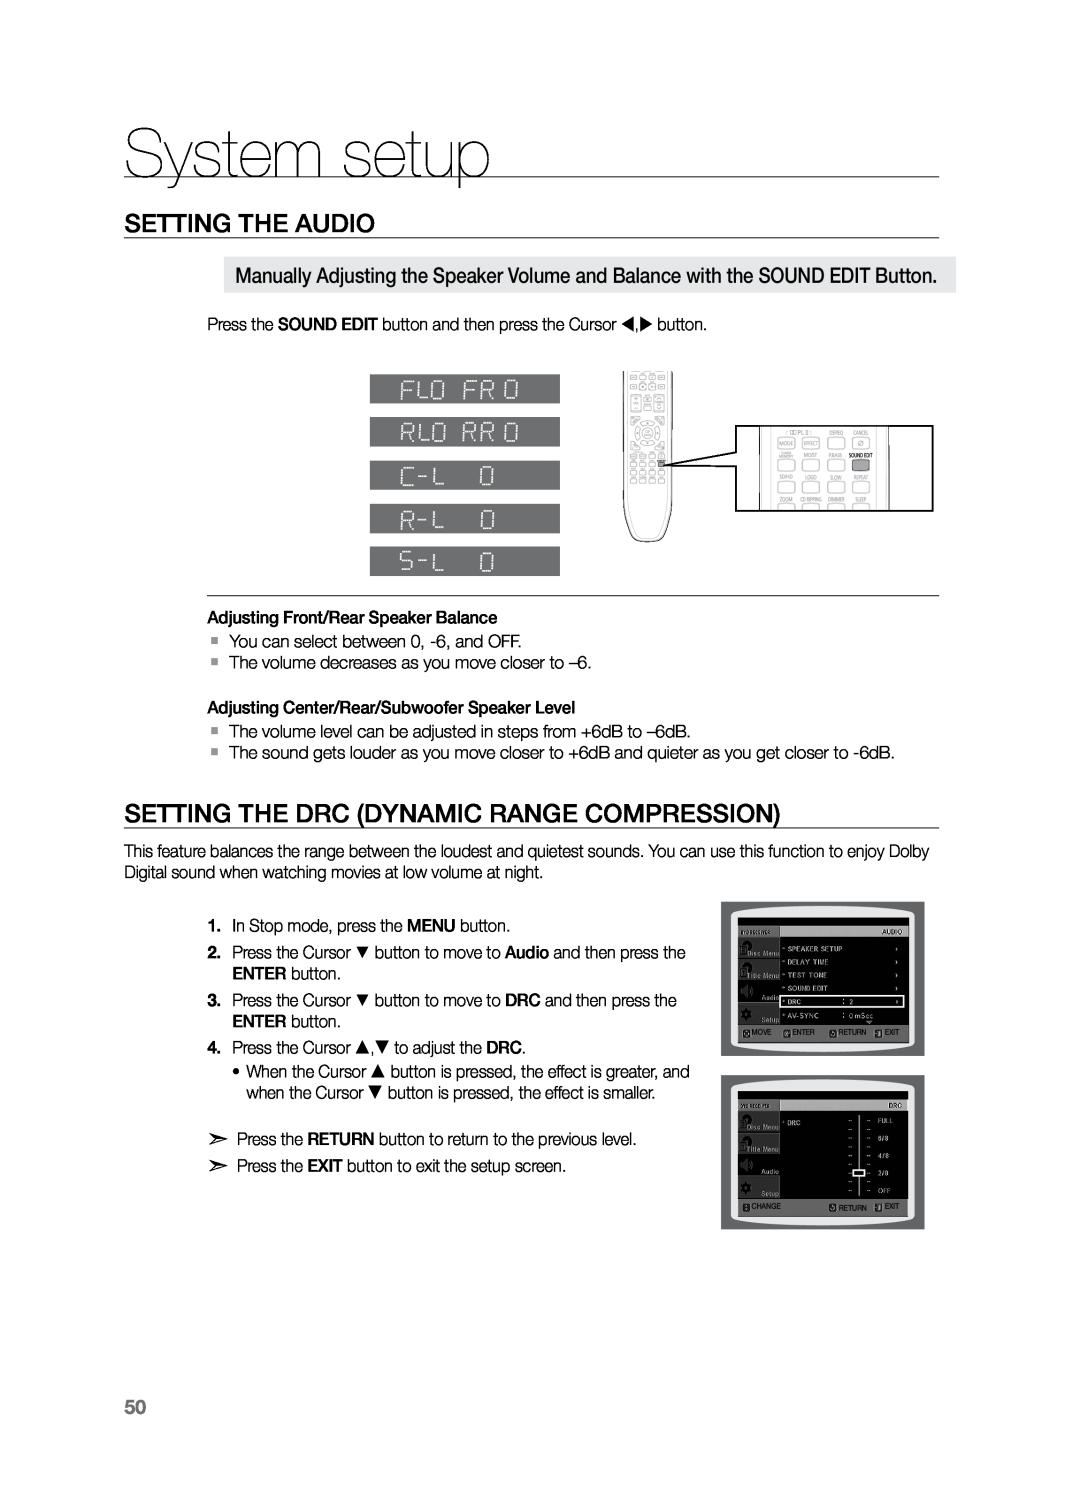 Samsung HT-Z221 user manual Setting the DRC Dynamic Range Compression, System setup, Setting the Audio 